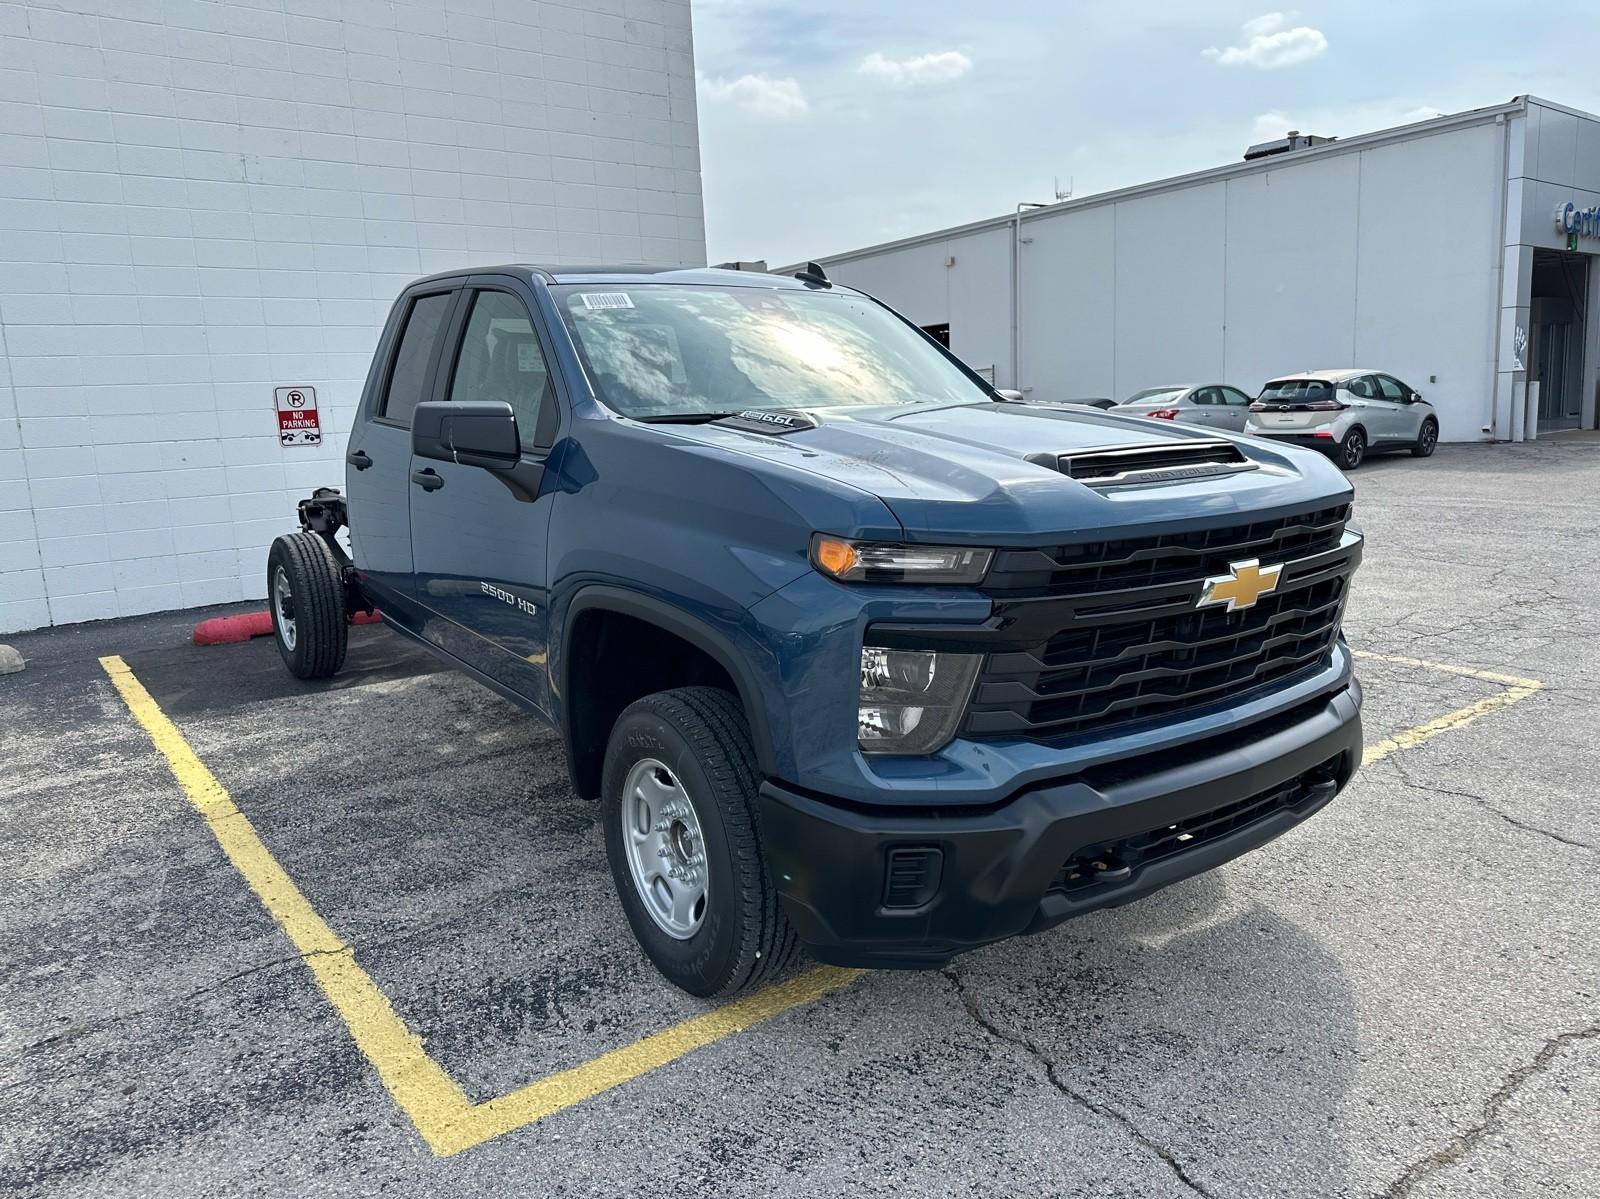 New Chevrolet Silverado HD Wt Double Cab In Sand Springs